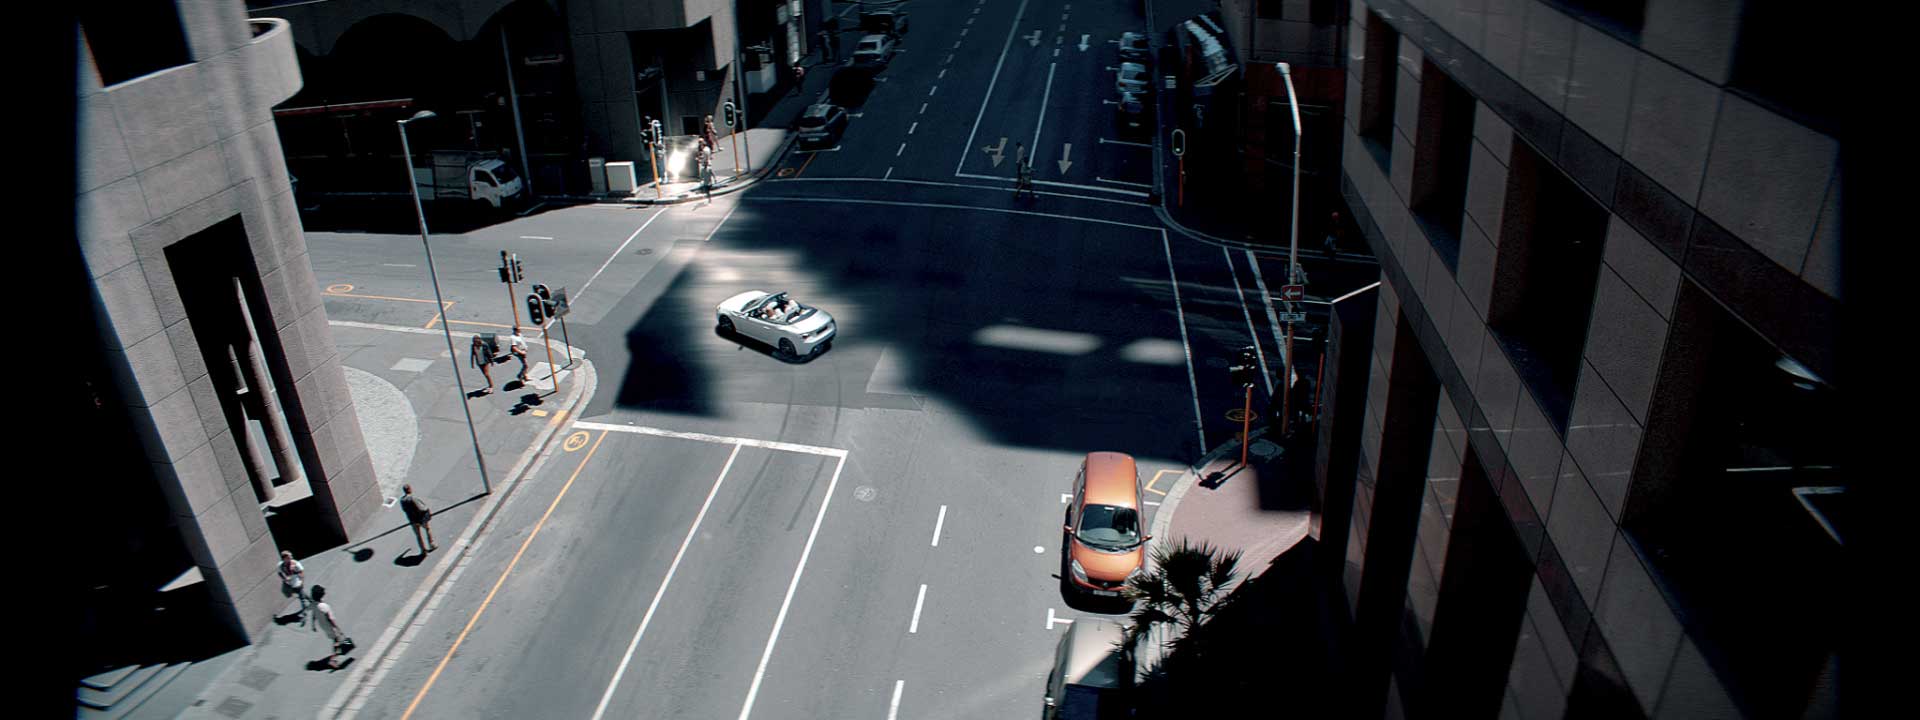 Crossing in a city. Still from Toyota FT-86 open – Commercial